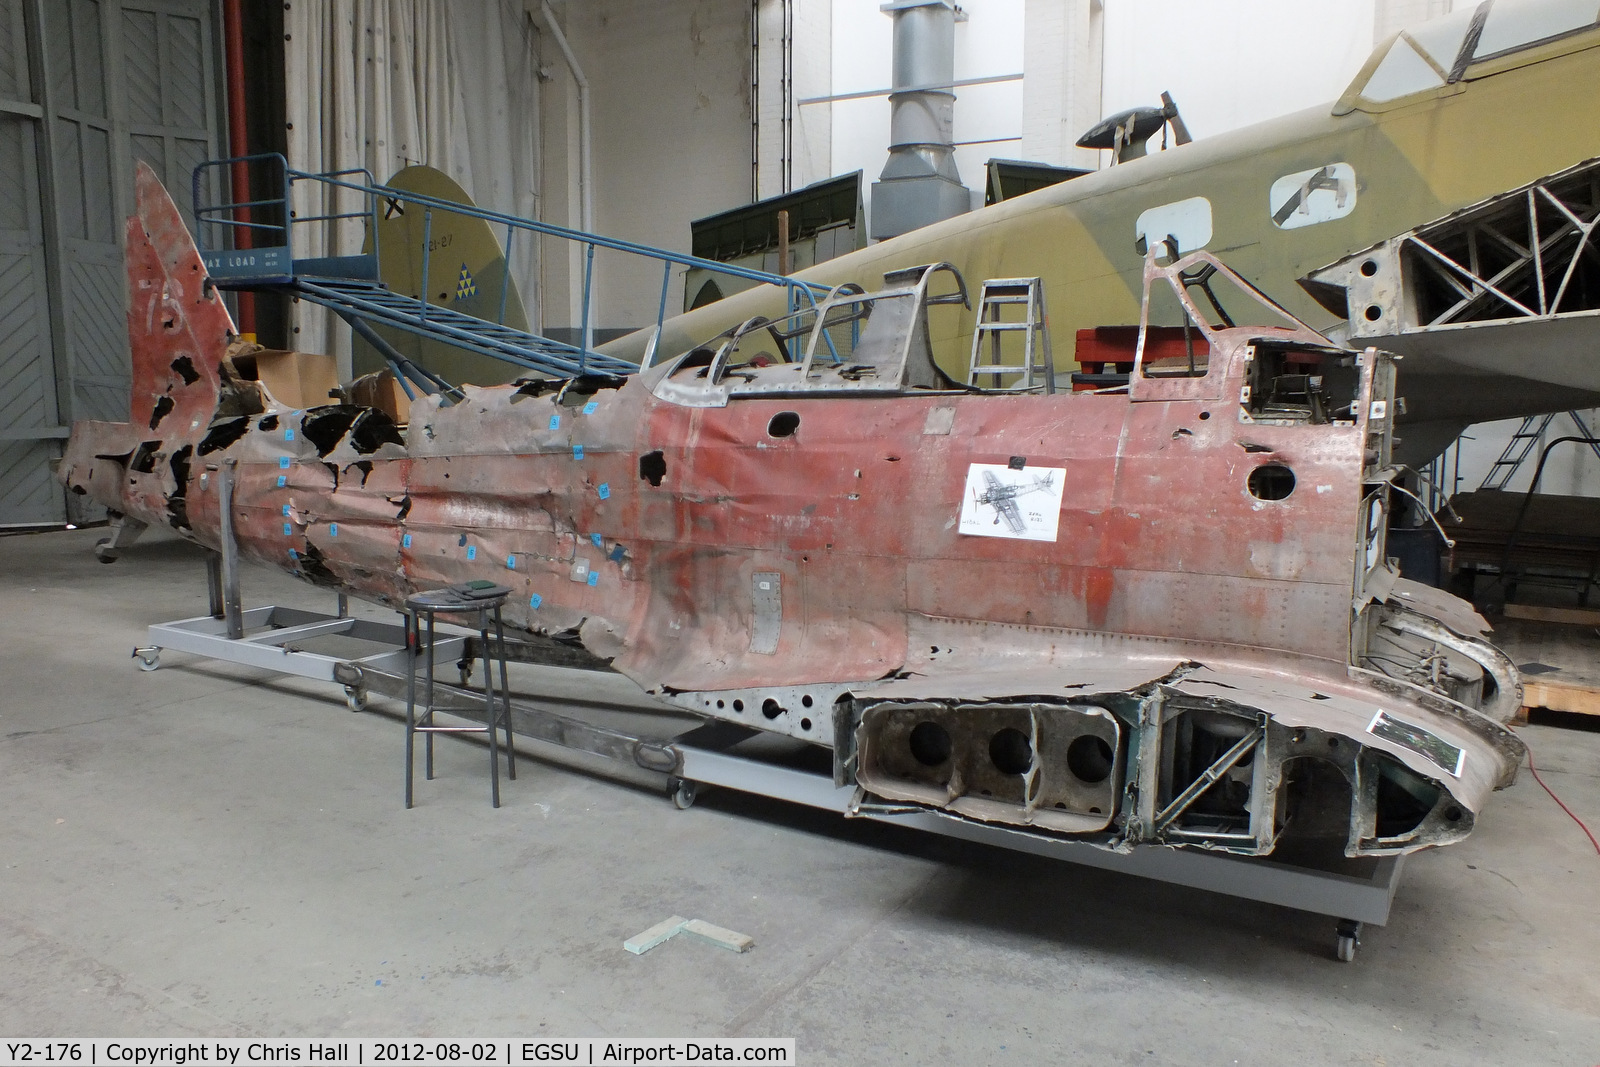 Y2-176, Mitsubishi A6M3-2 Zero C/N 3685, Recovered from Taroa in the Marshall Islands in 1991, originally part of the 252nd Japanese Naval Air Group. Acquired by the IWM in 1999